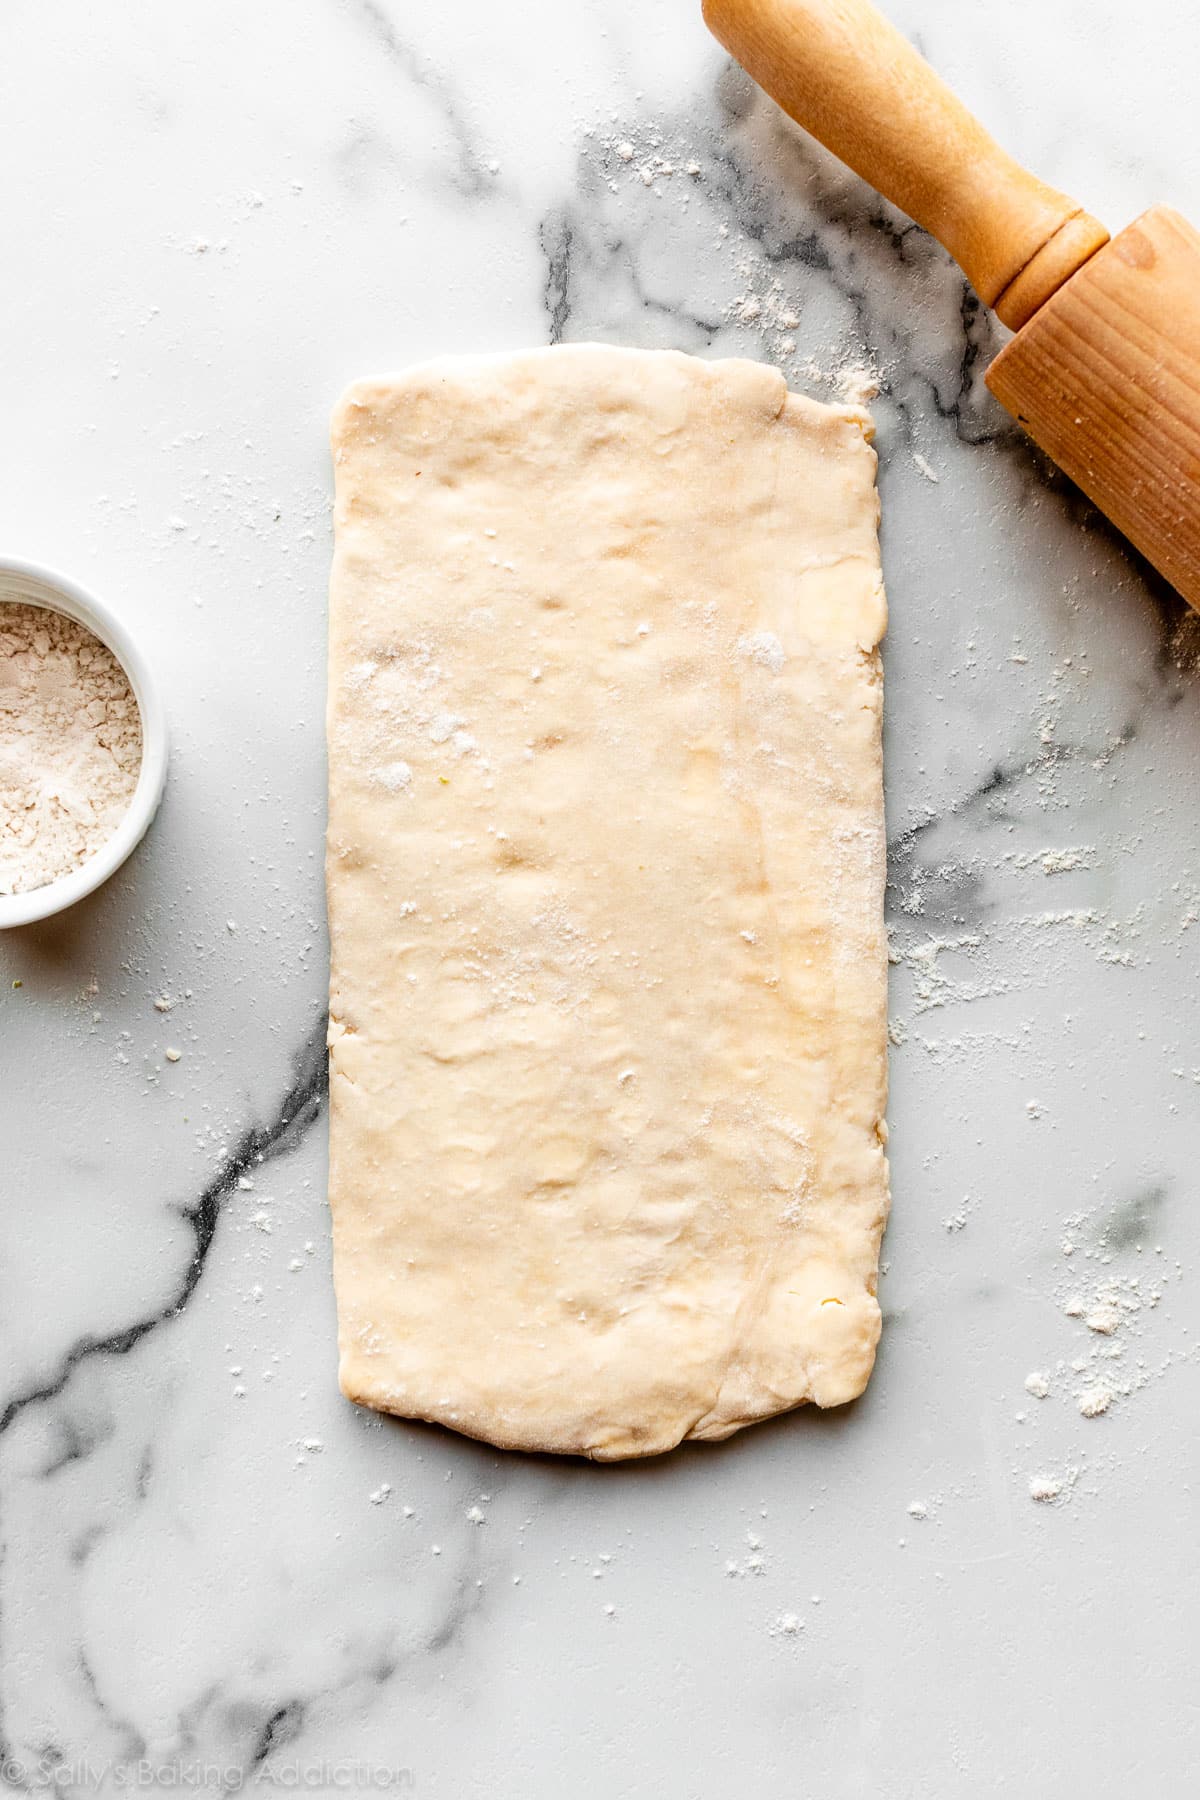 slab of rough puff pastry dough on marble counter